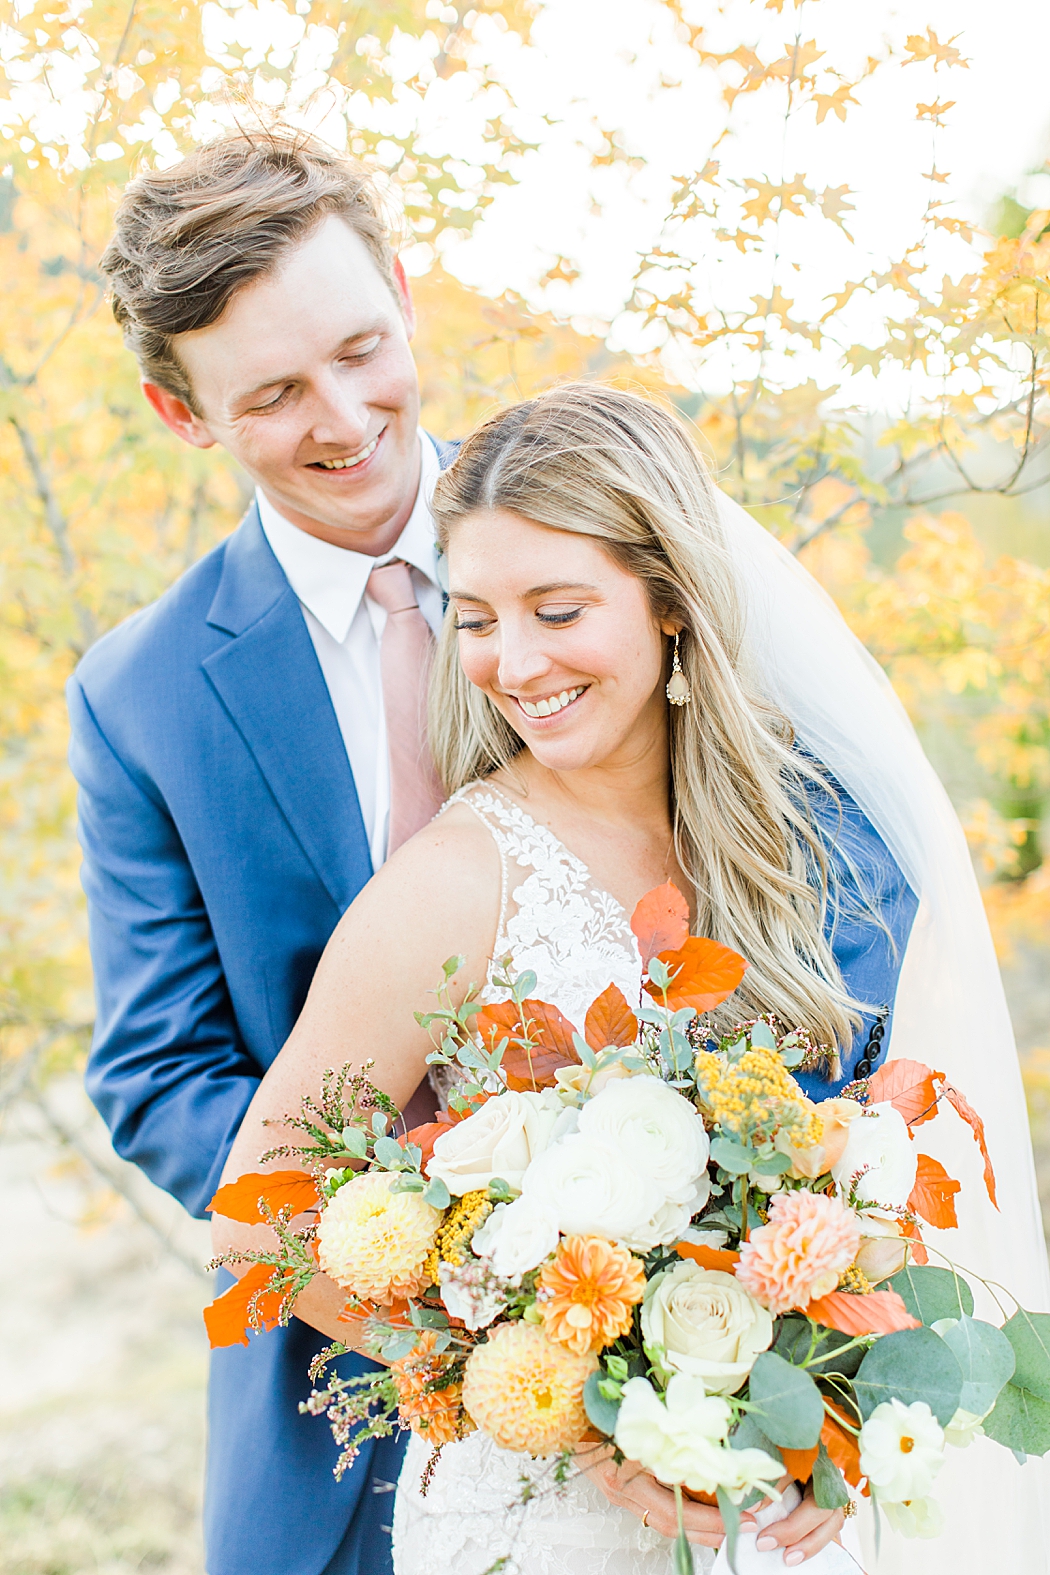 Terra Cotta Fall Micro Wedding in Kerrville Texas at a private estate in the Hill Country by Allison Jeffers Photography 0068